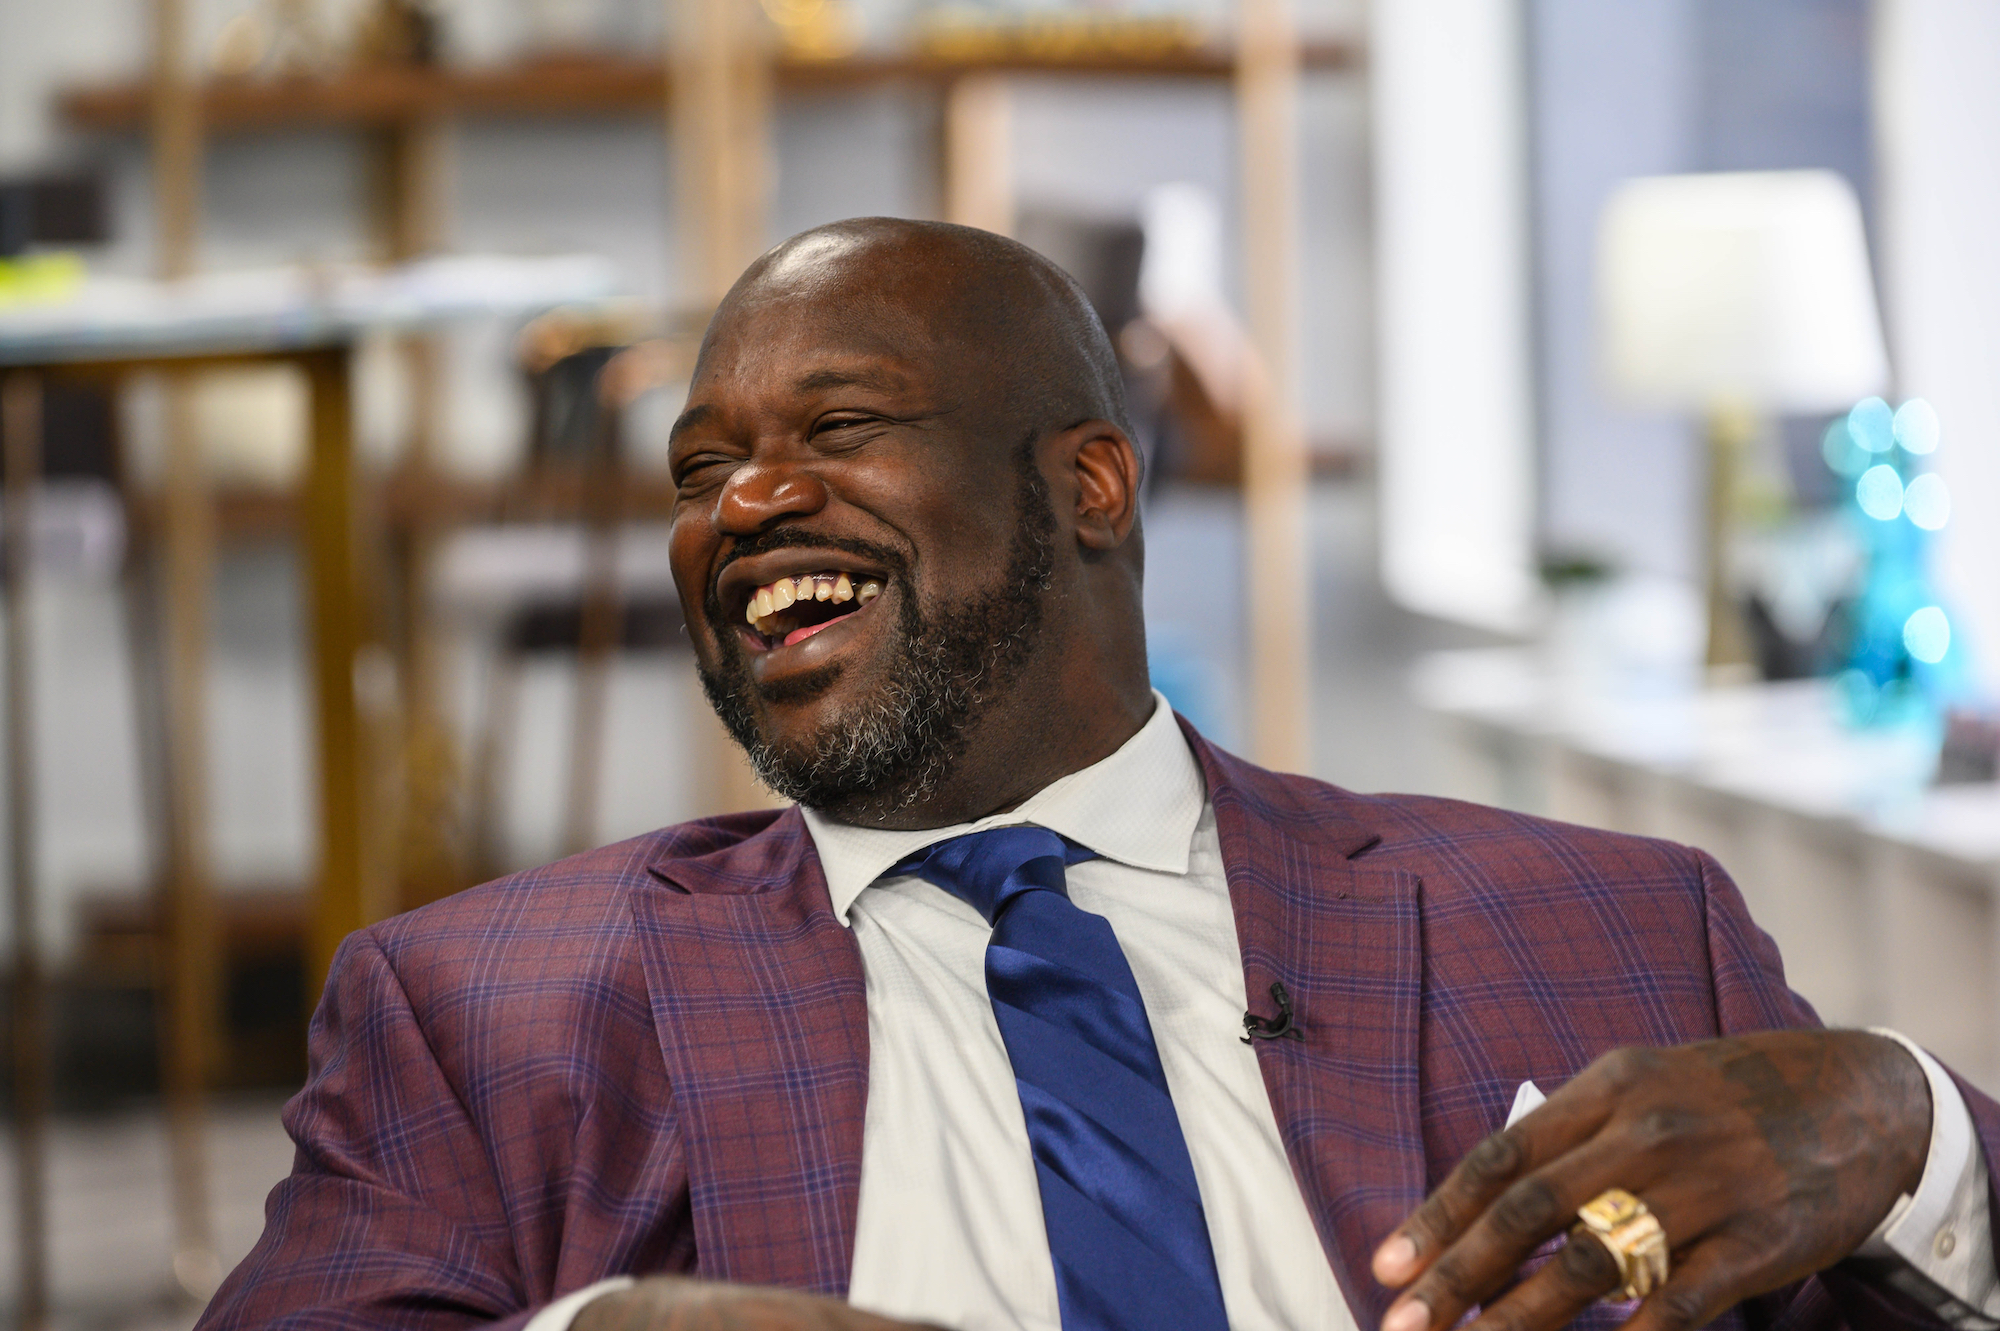 Shaquille O'Neal laughing, turned to the side